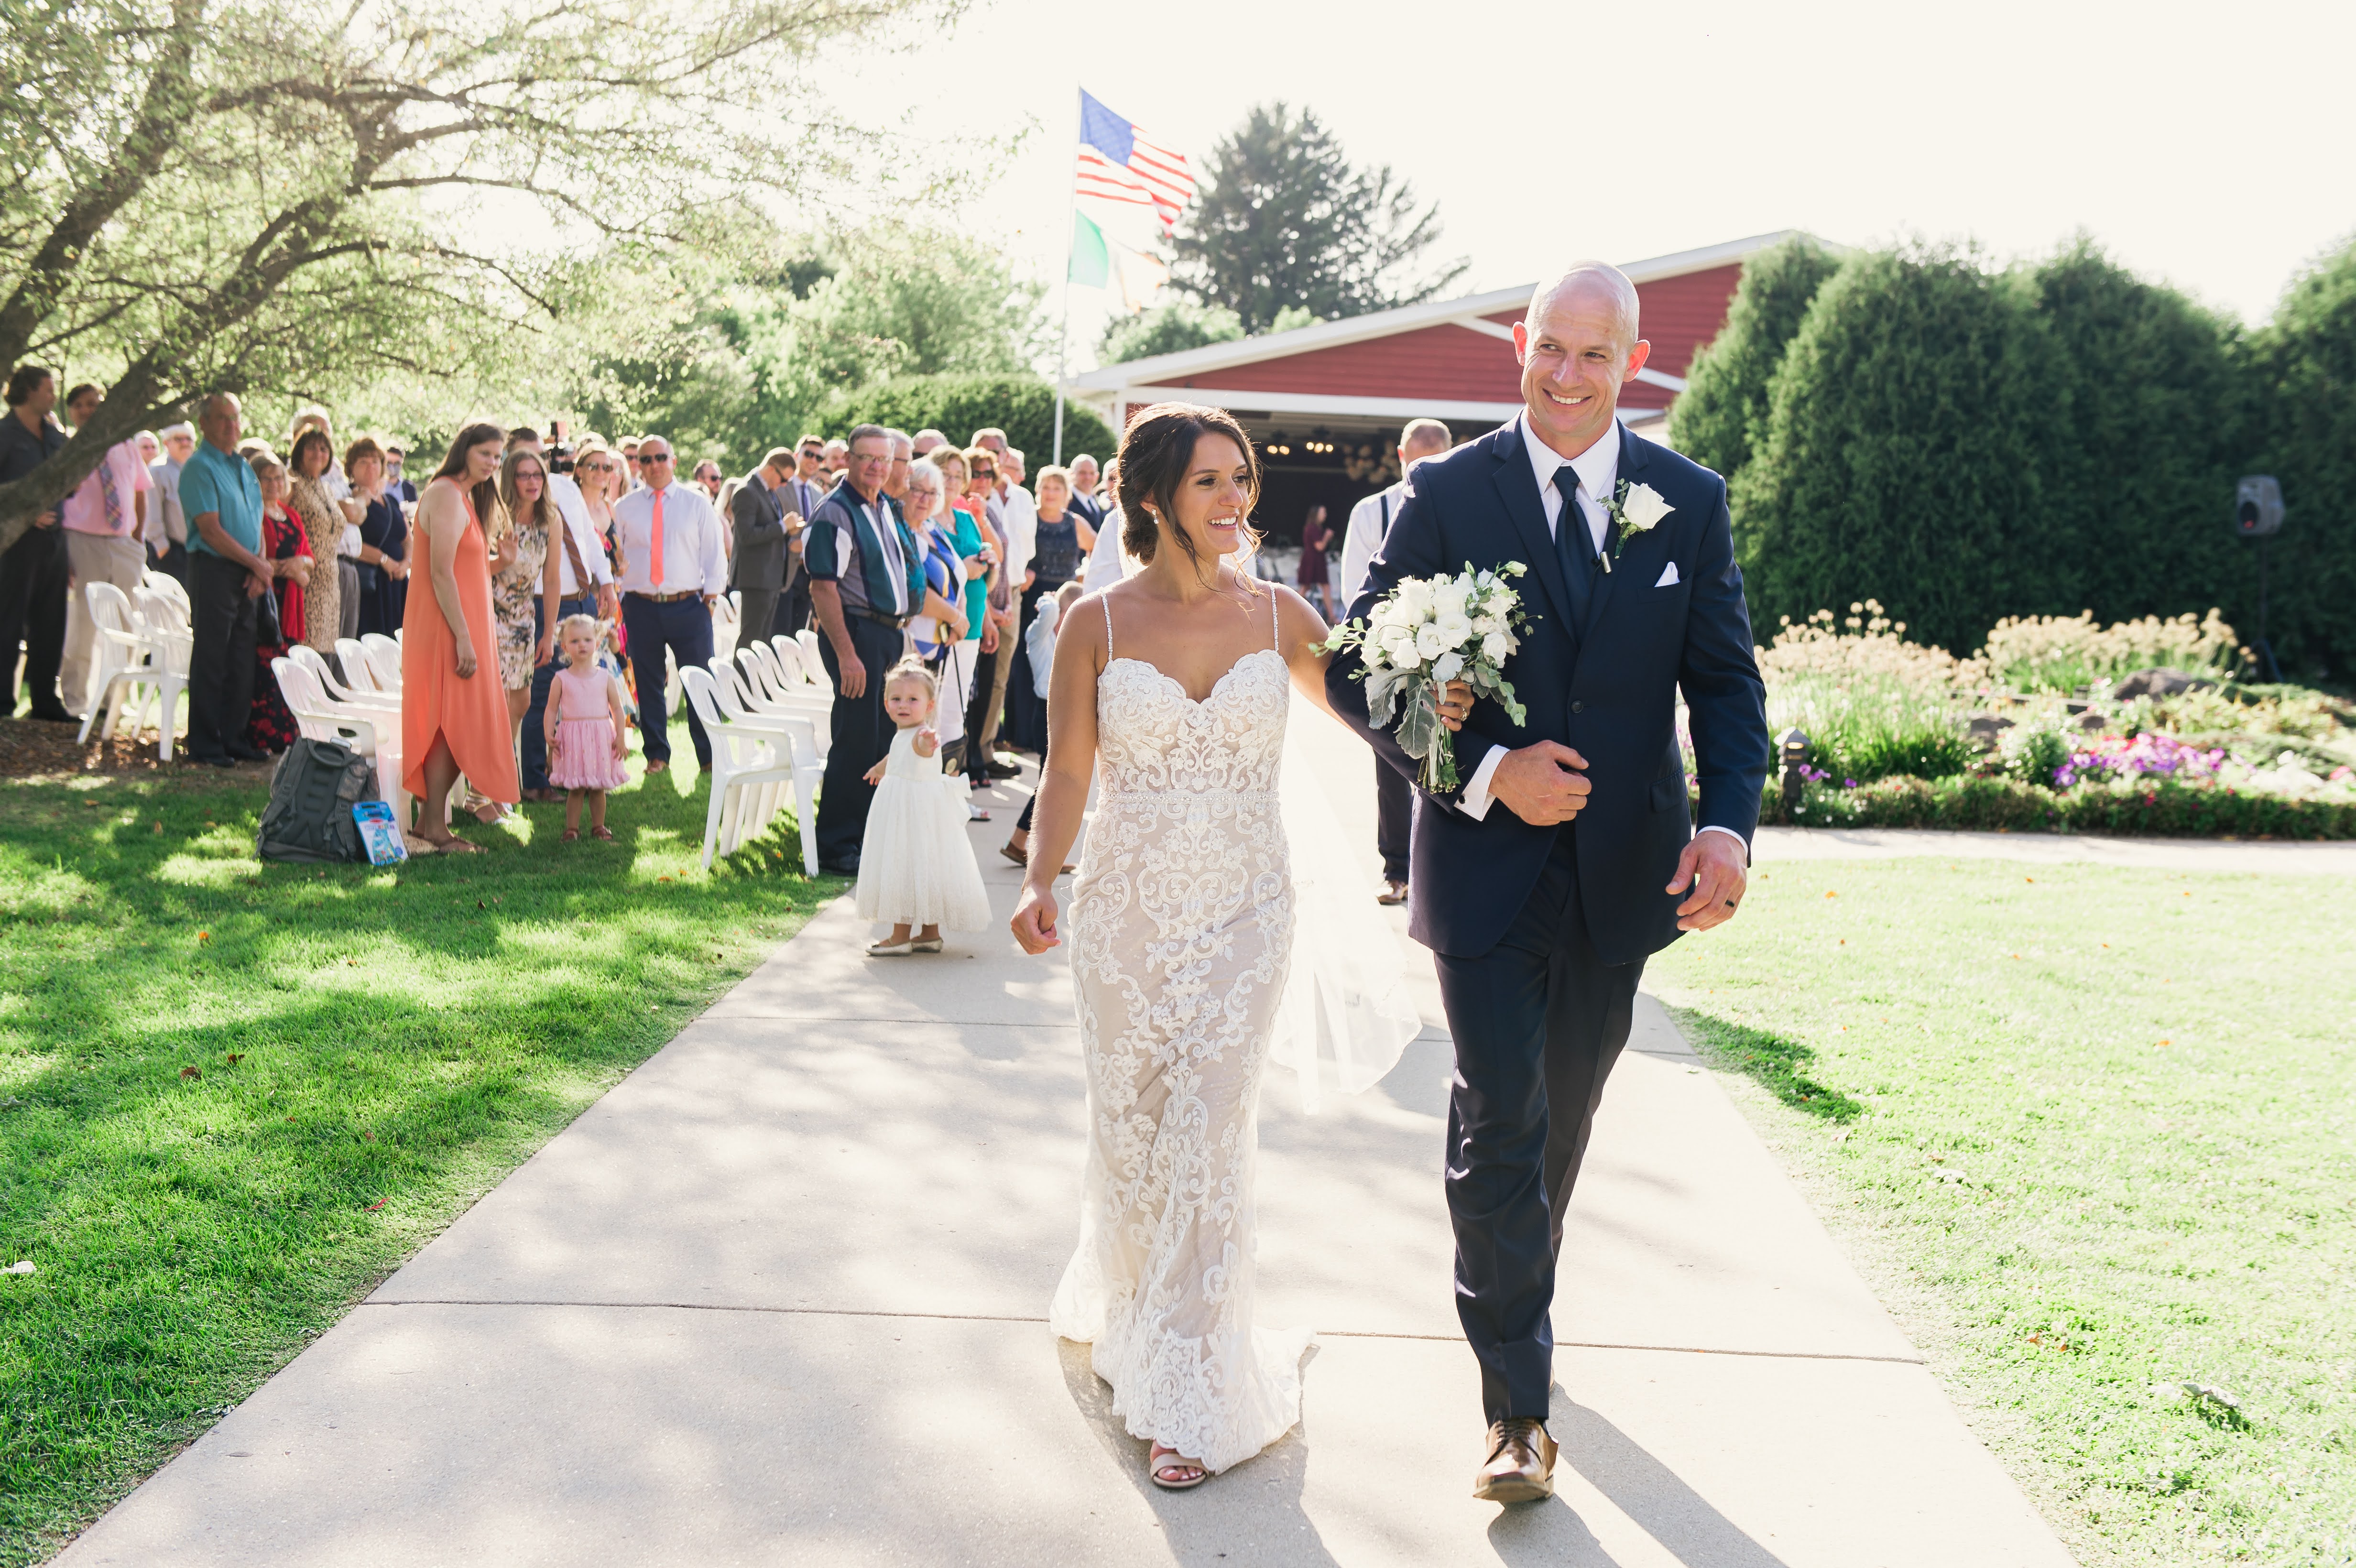 Plan Your Wedding at The Red Barn